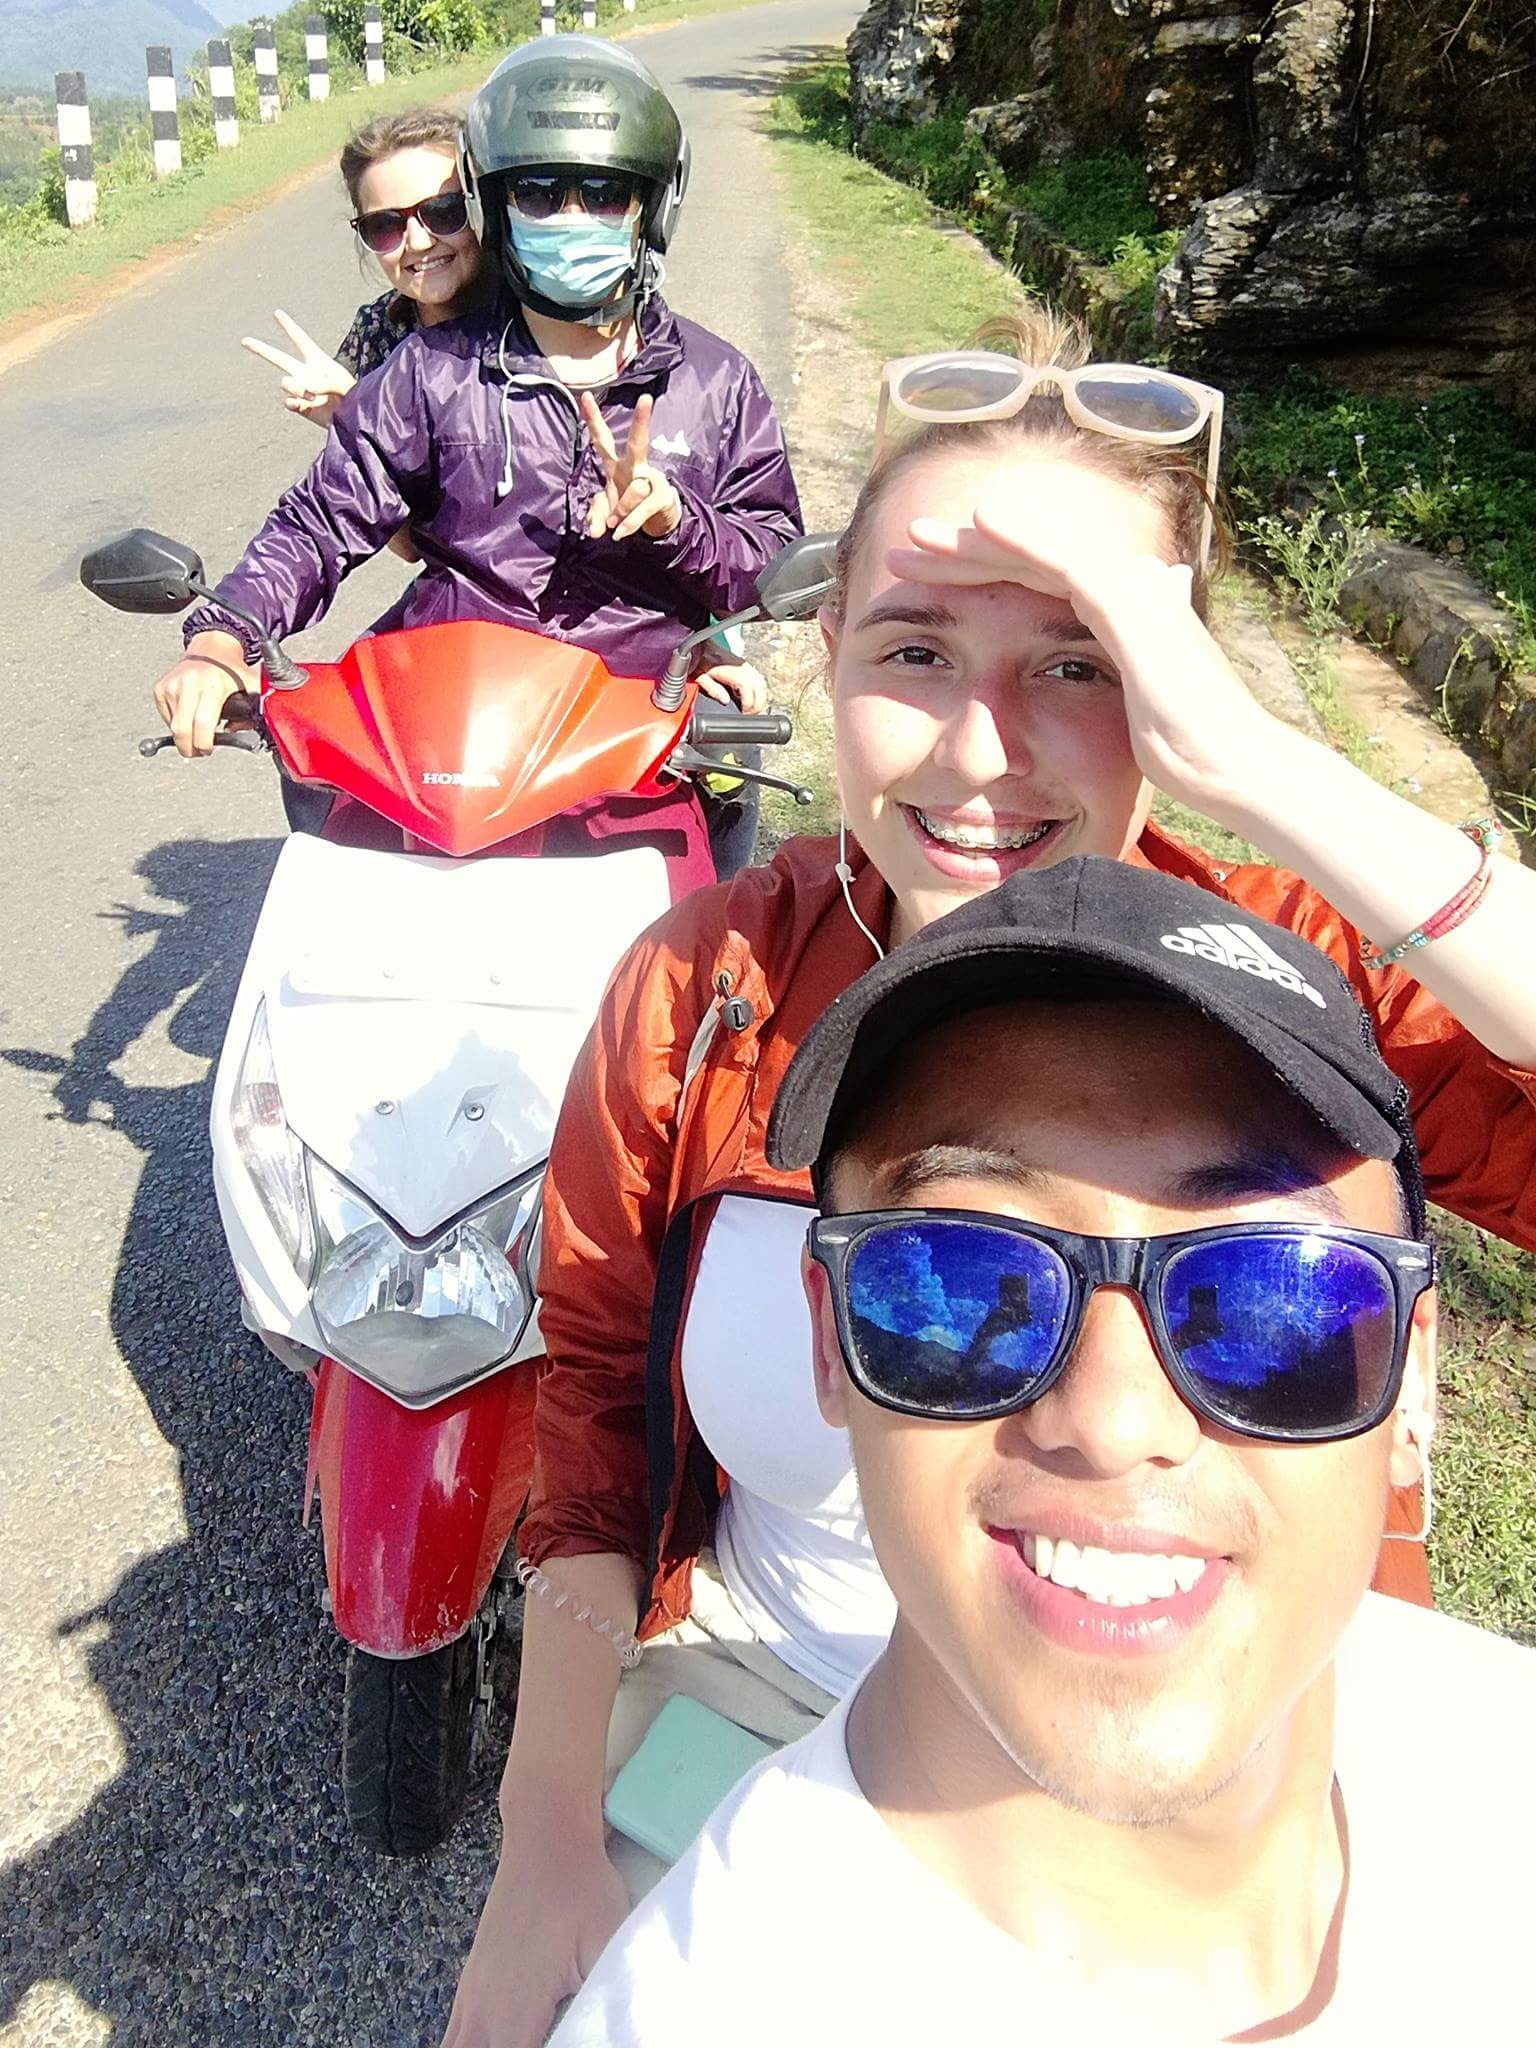 alexandria riding a scooter in Nepal